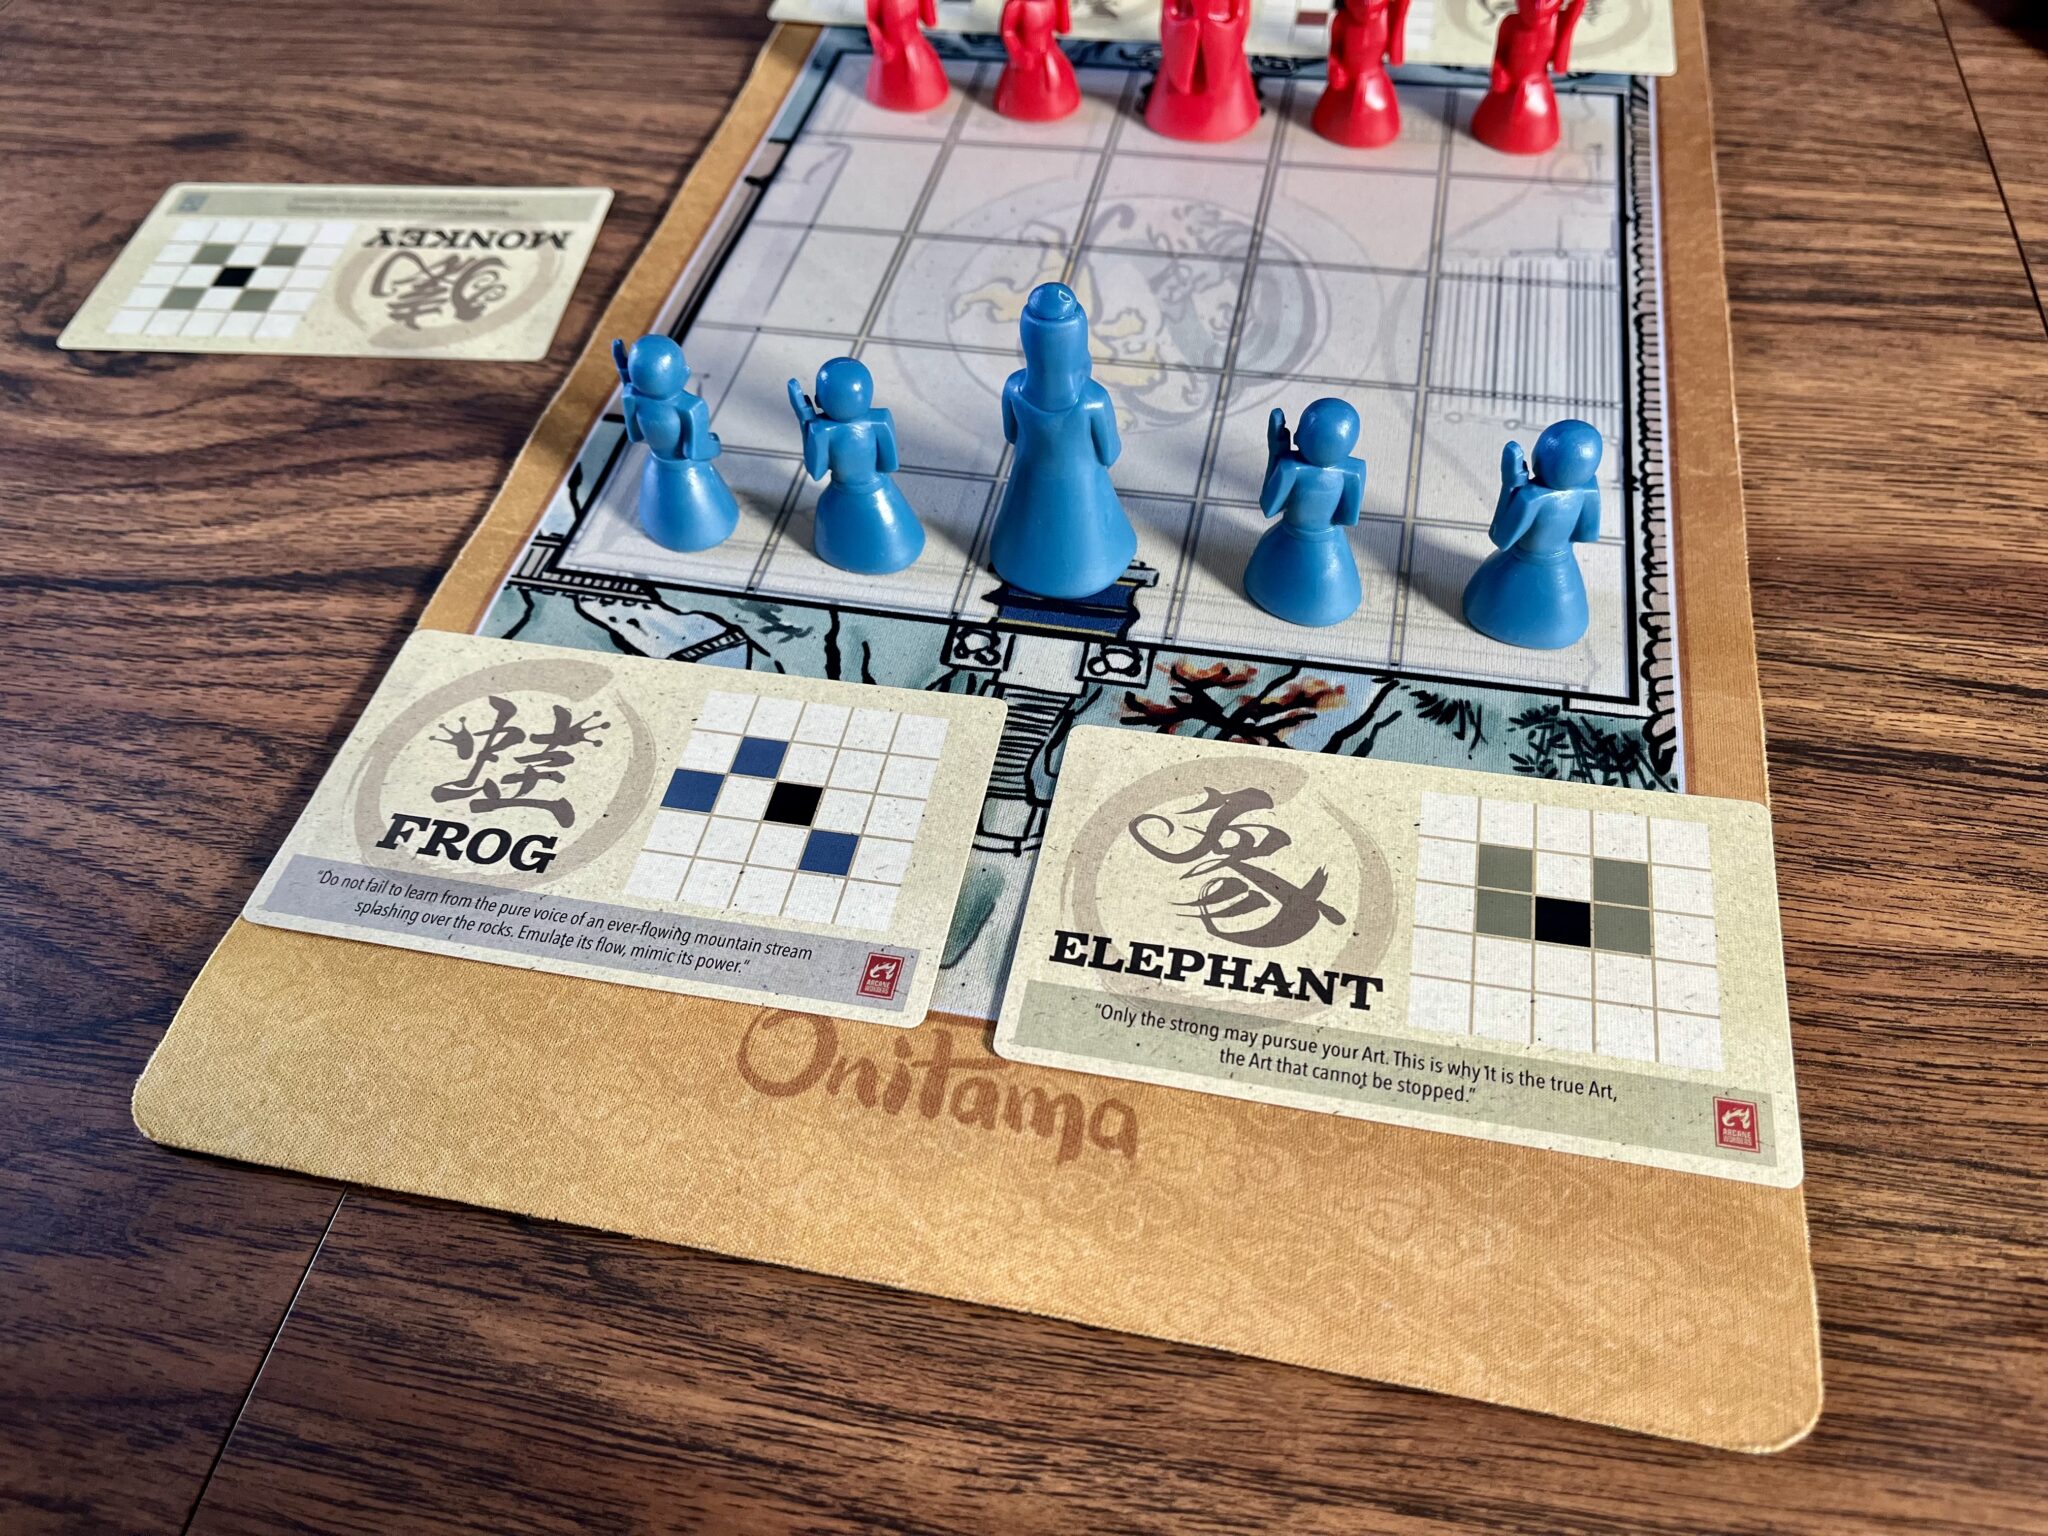 Onitama with player setup and 2 movement cards